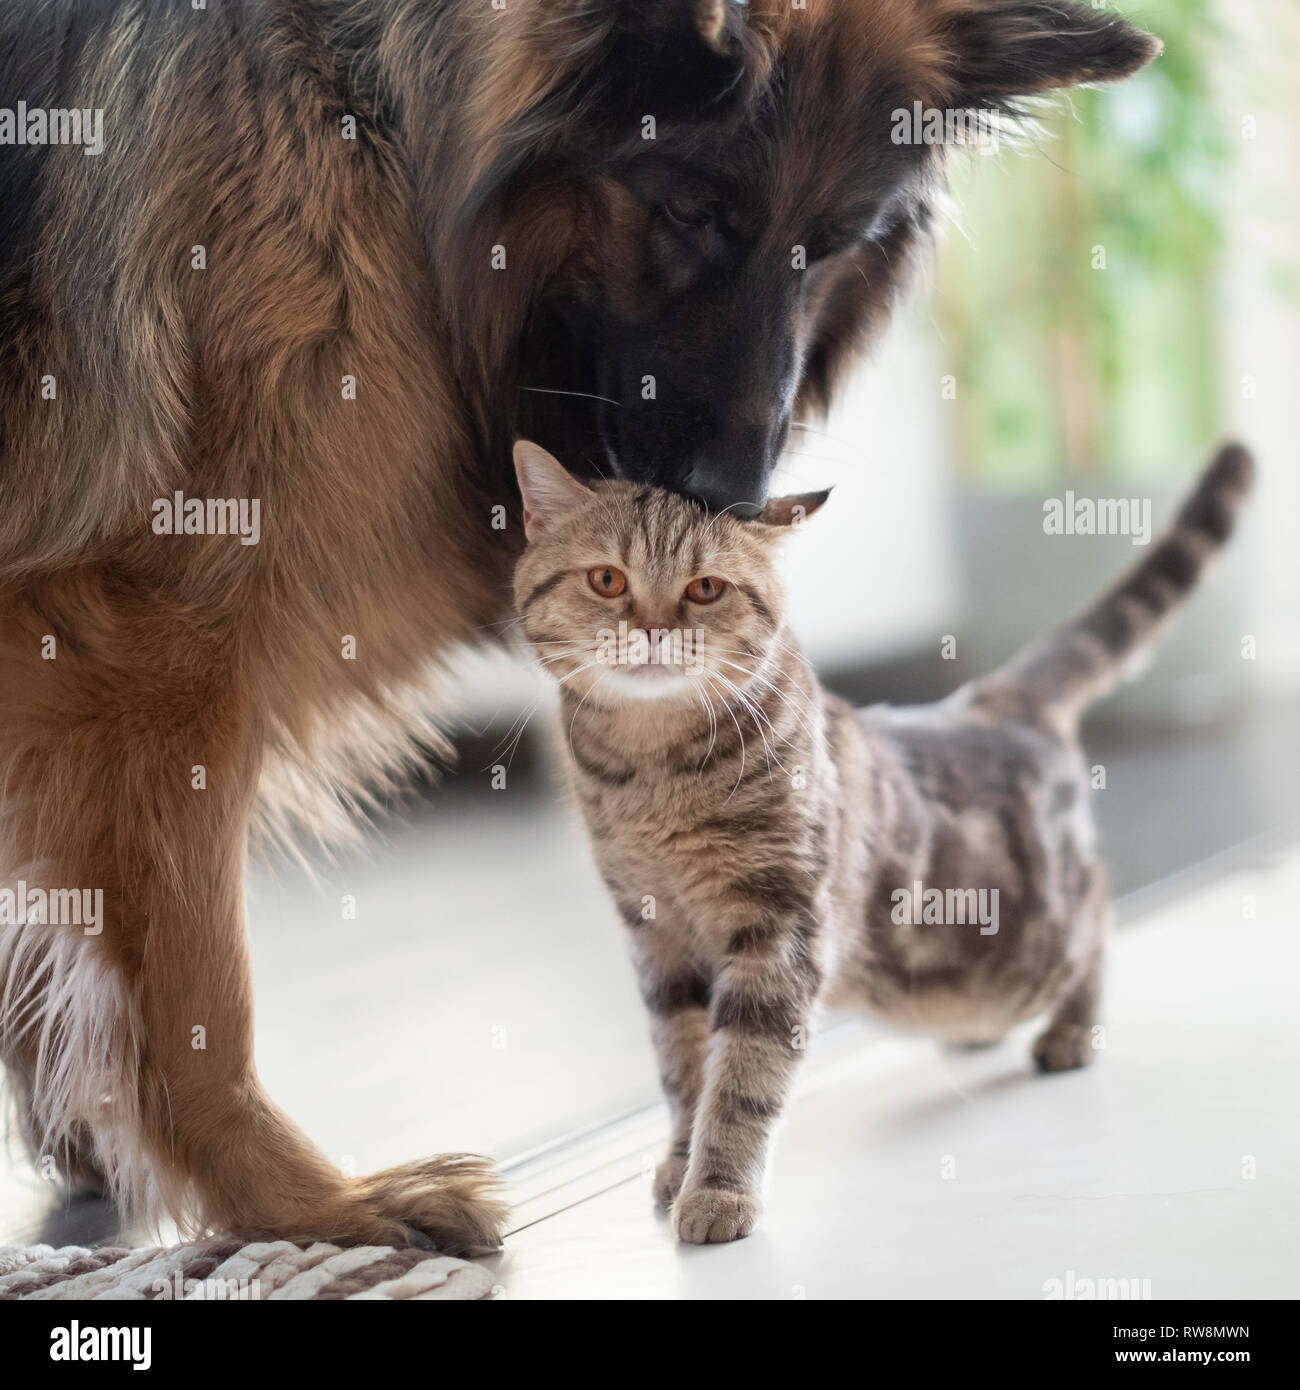 Cat and dog together indoors Stock Photo